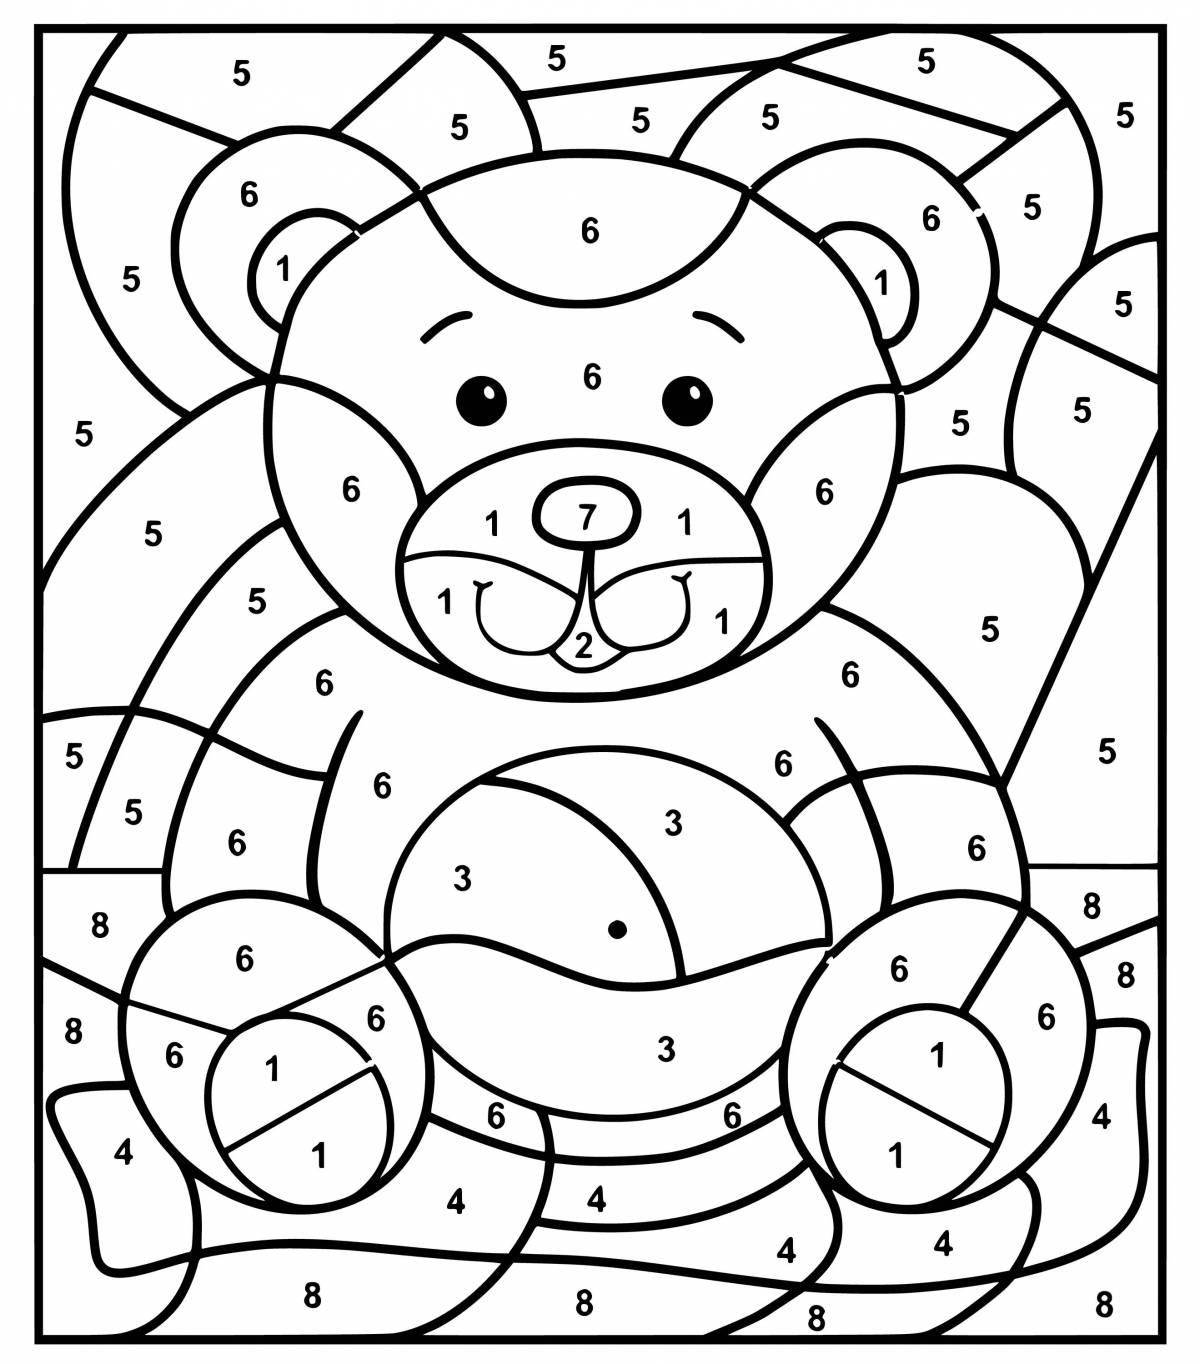 Inspiring paints 10 years coloring page